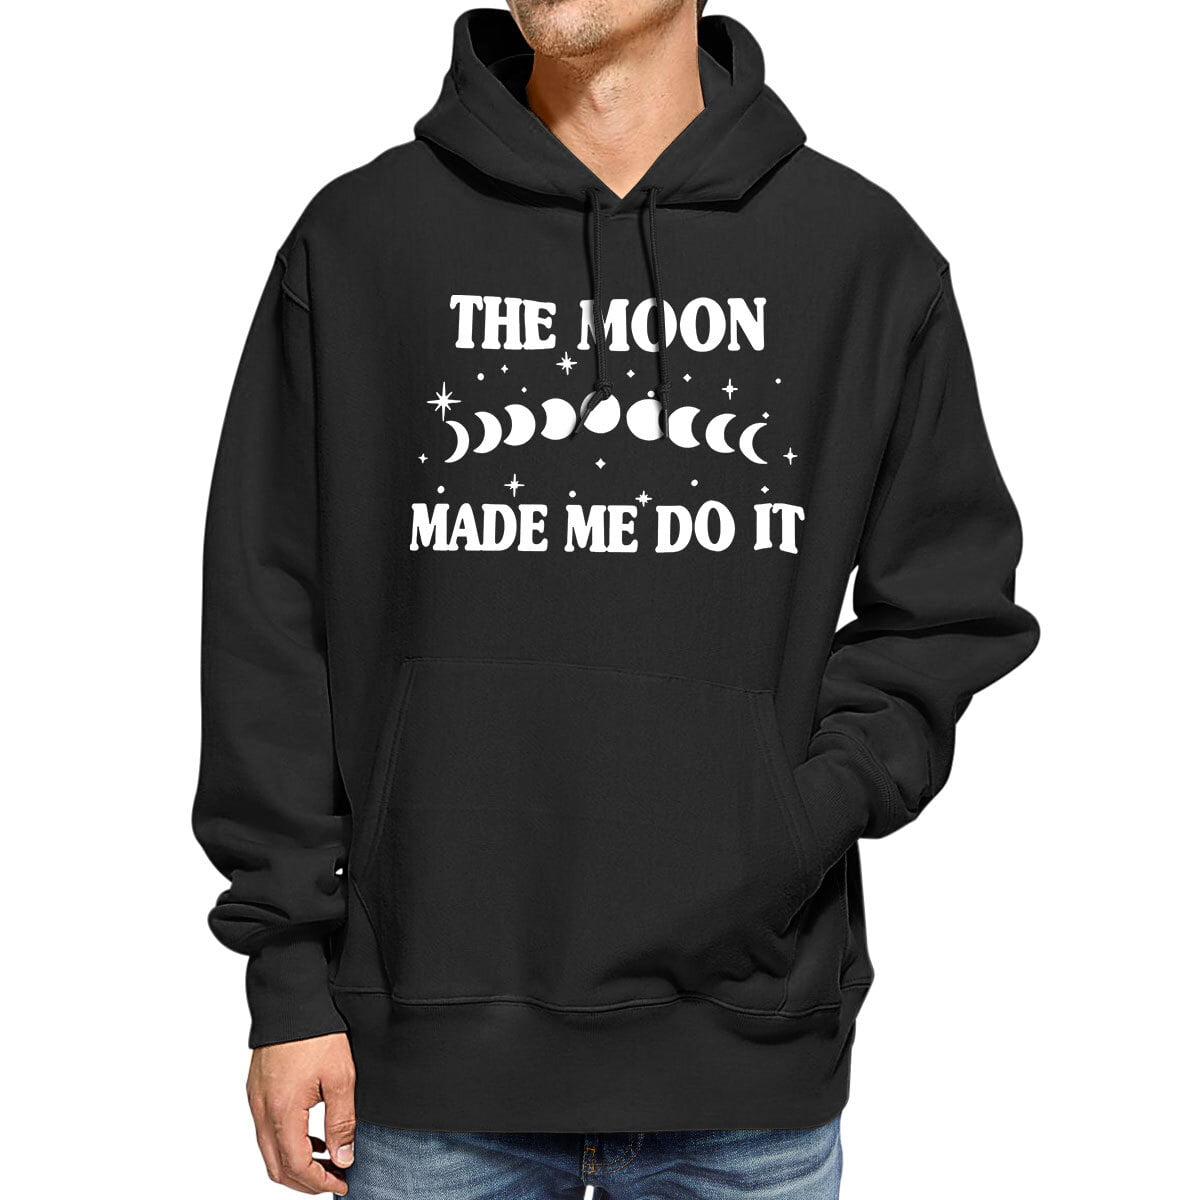 Nature Pullover Phases of Moon Hoodie Just A Phase Sweater Wild Child Hoodie Moon Child Sweatshirt Full Moons Unisex Hoodie